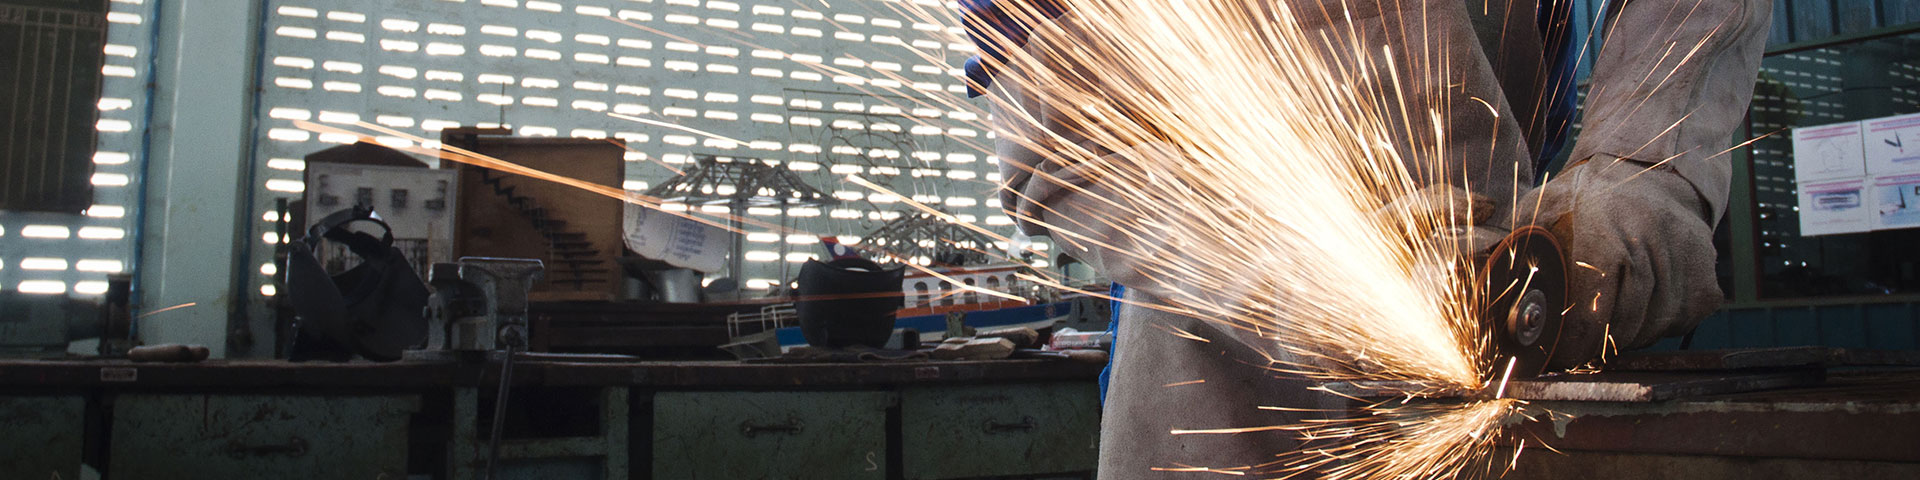 A person operates a grinder in a workshop and sparks are coming out of it